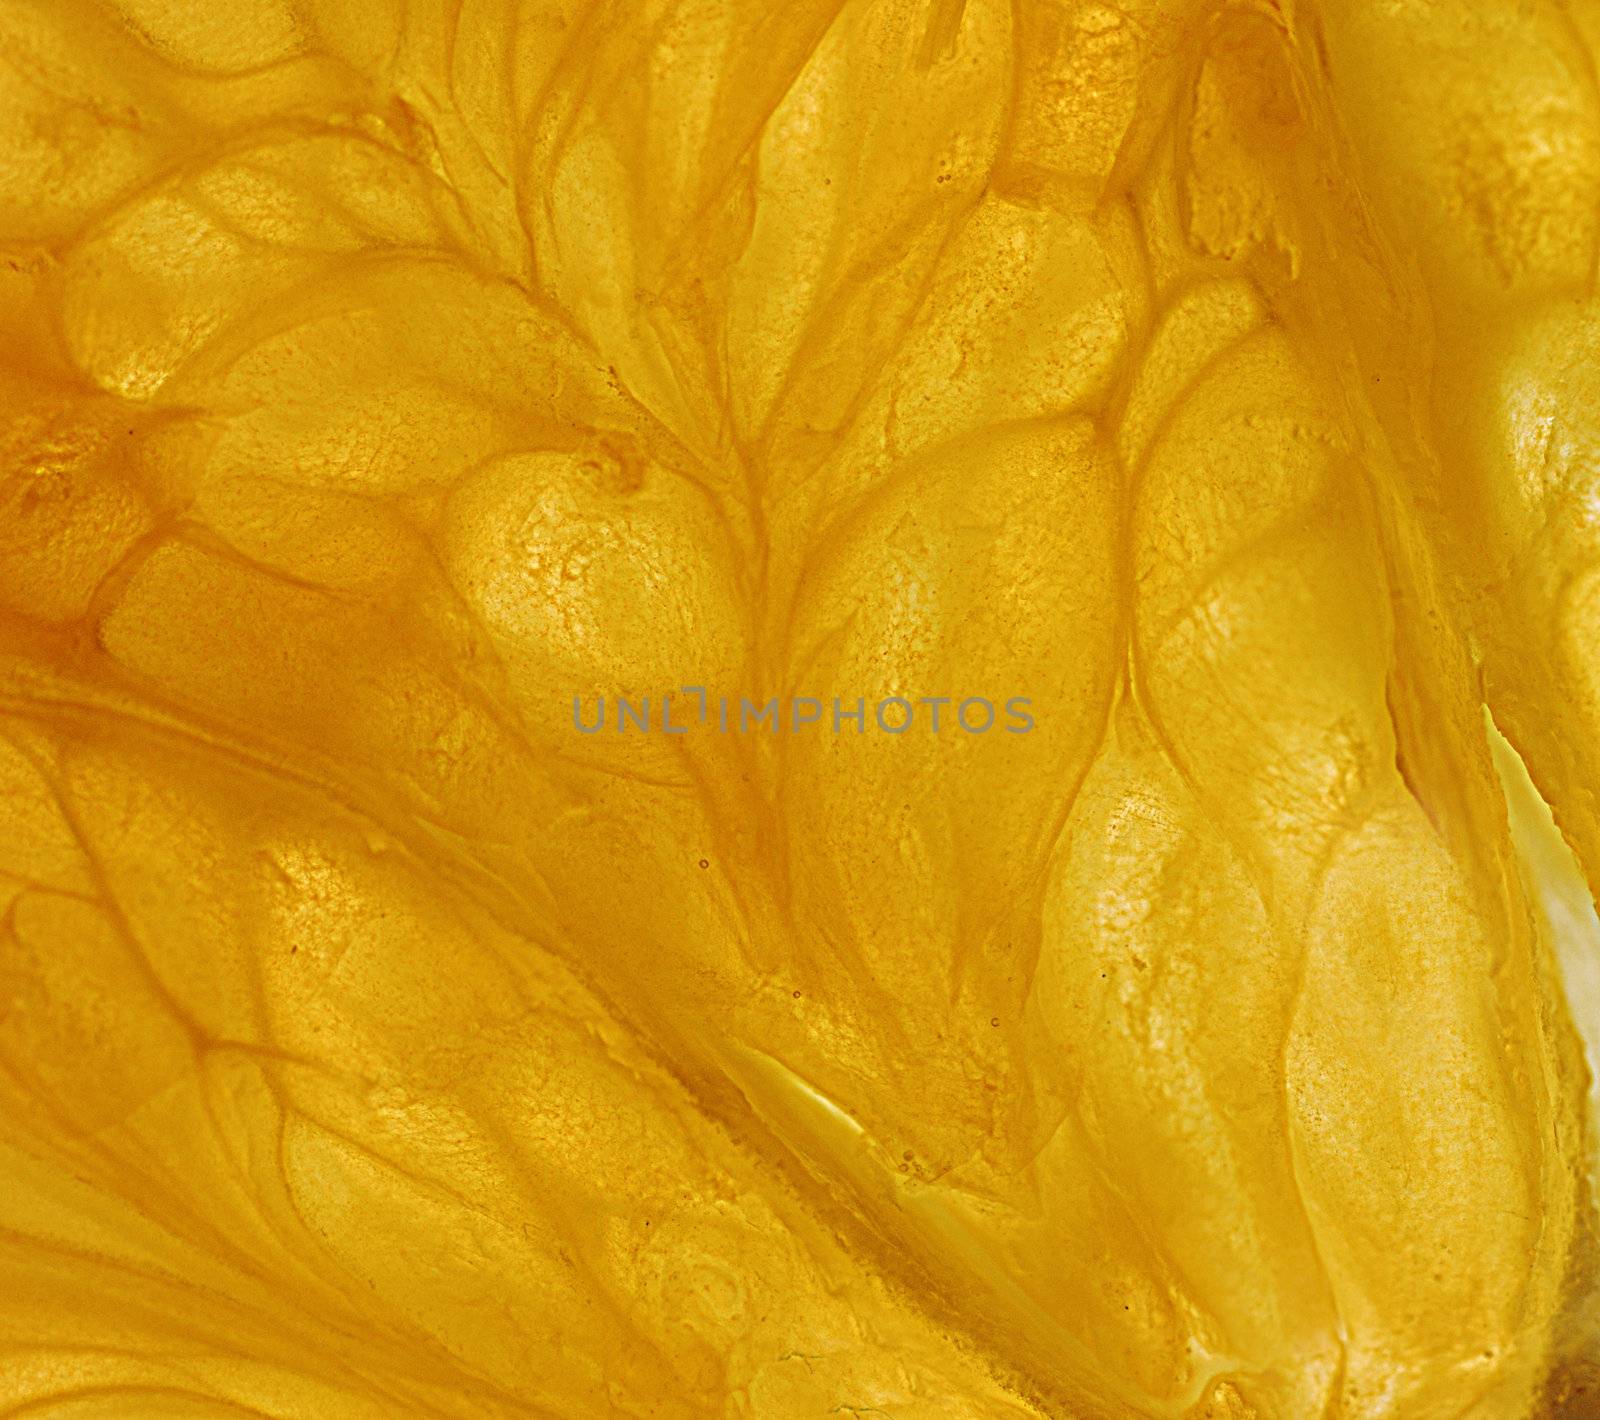 Abstract texture. A photo close up structures of a dry orange